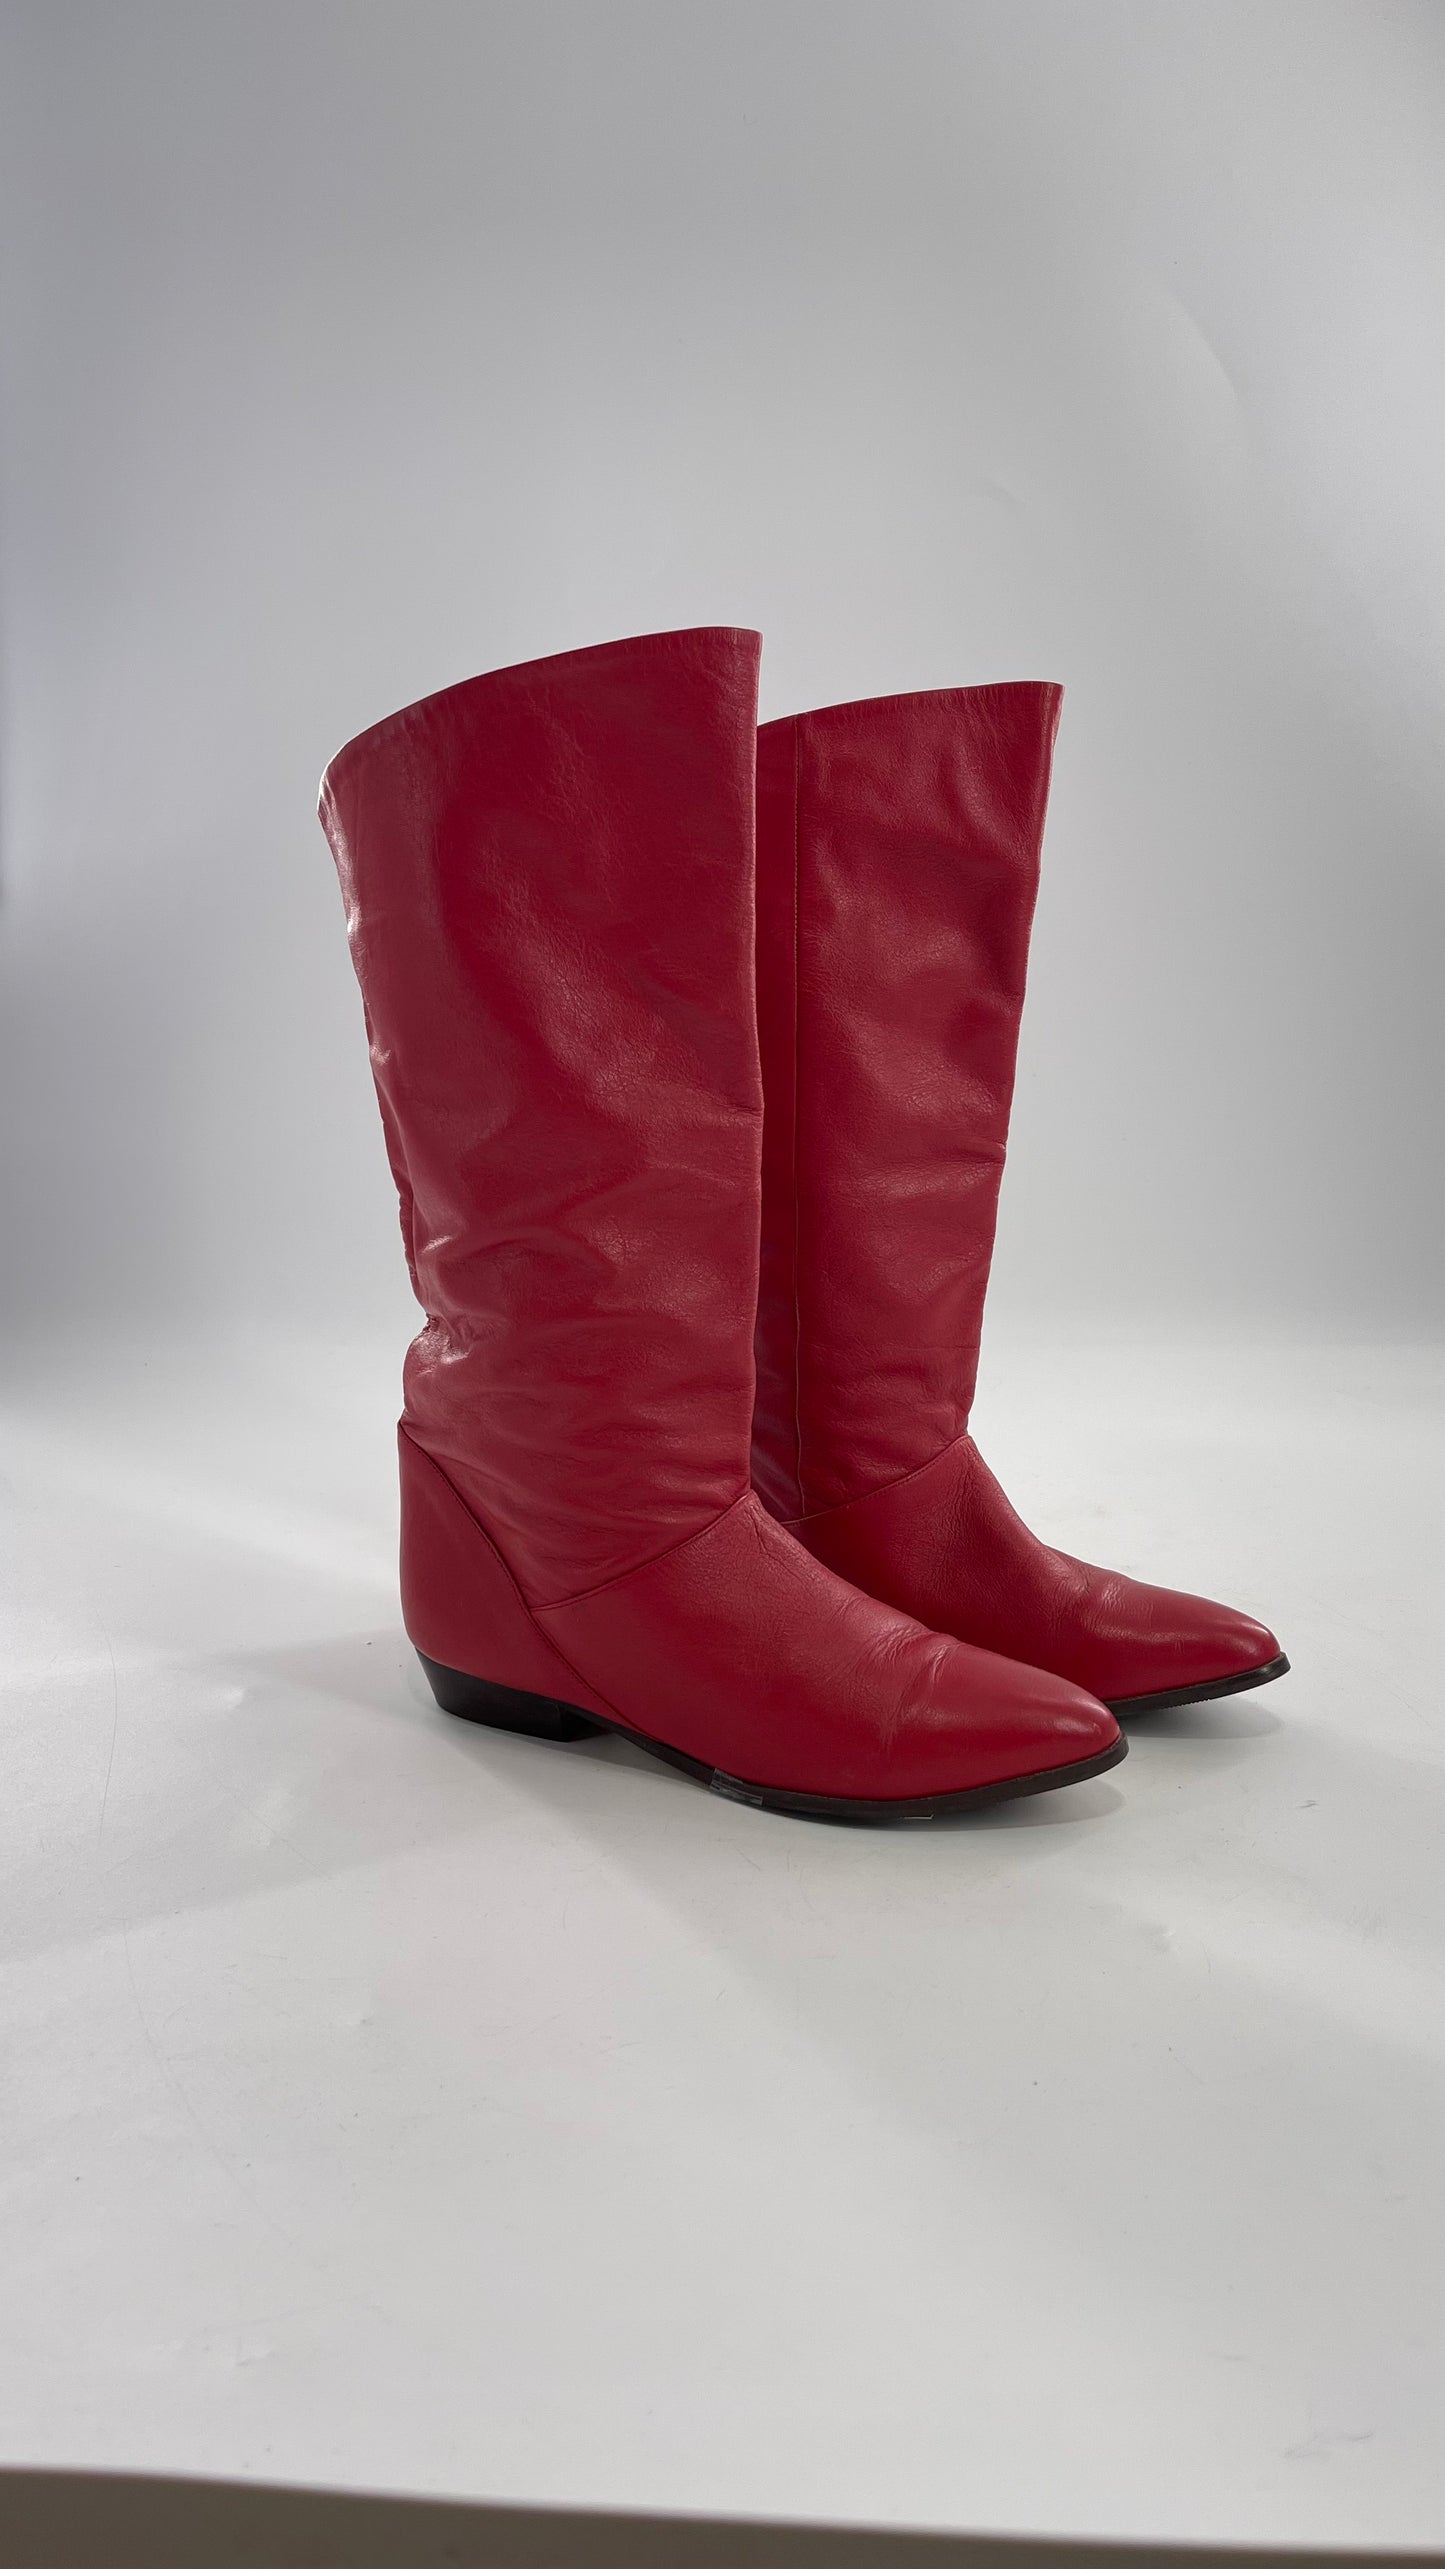 Vintage 1980s Red Argentinian Leather Pointed Toe Baggy Boots (8)